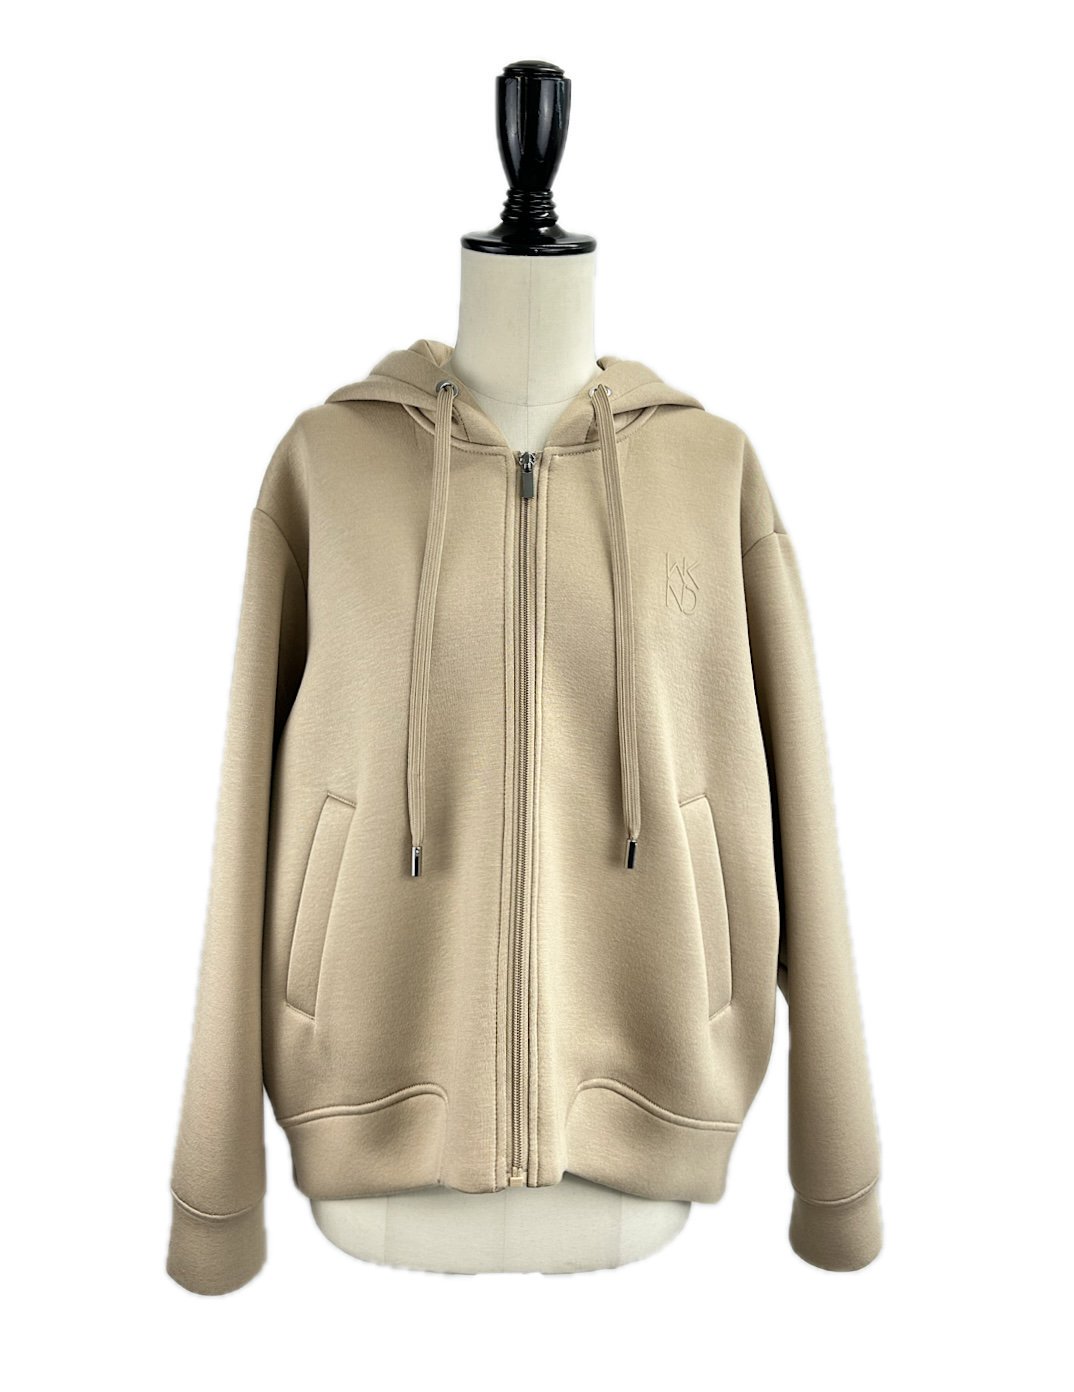 <img class='new_mark_img1' src='https://img.shop-pro.jp/img/new/icons6.gif' style='border:none;display:inline;margin:0px;padding:0px;width:auto;' />MAXMARA WEEKEND / ZIP UP HOODIE